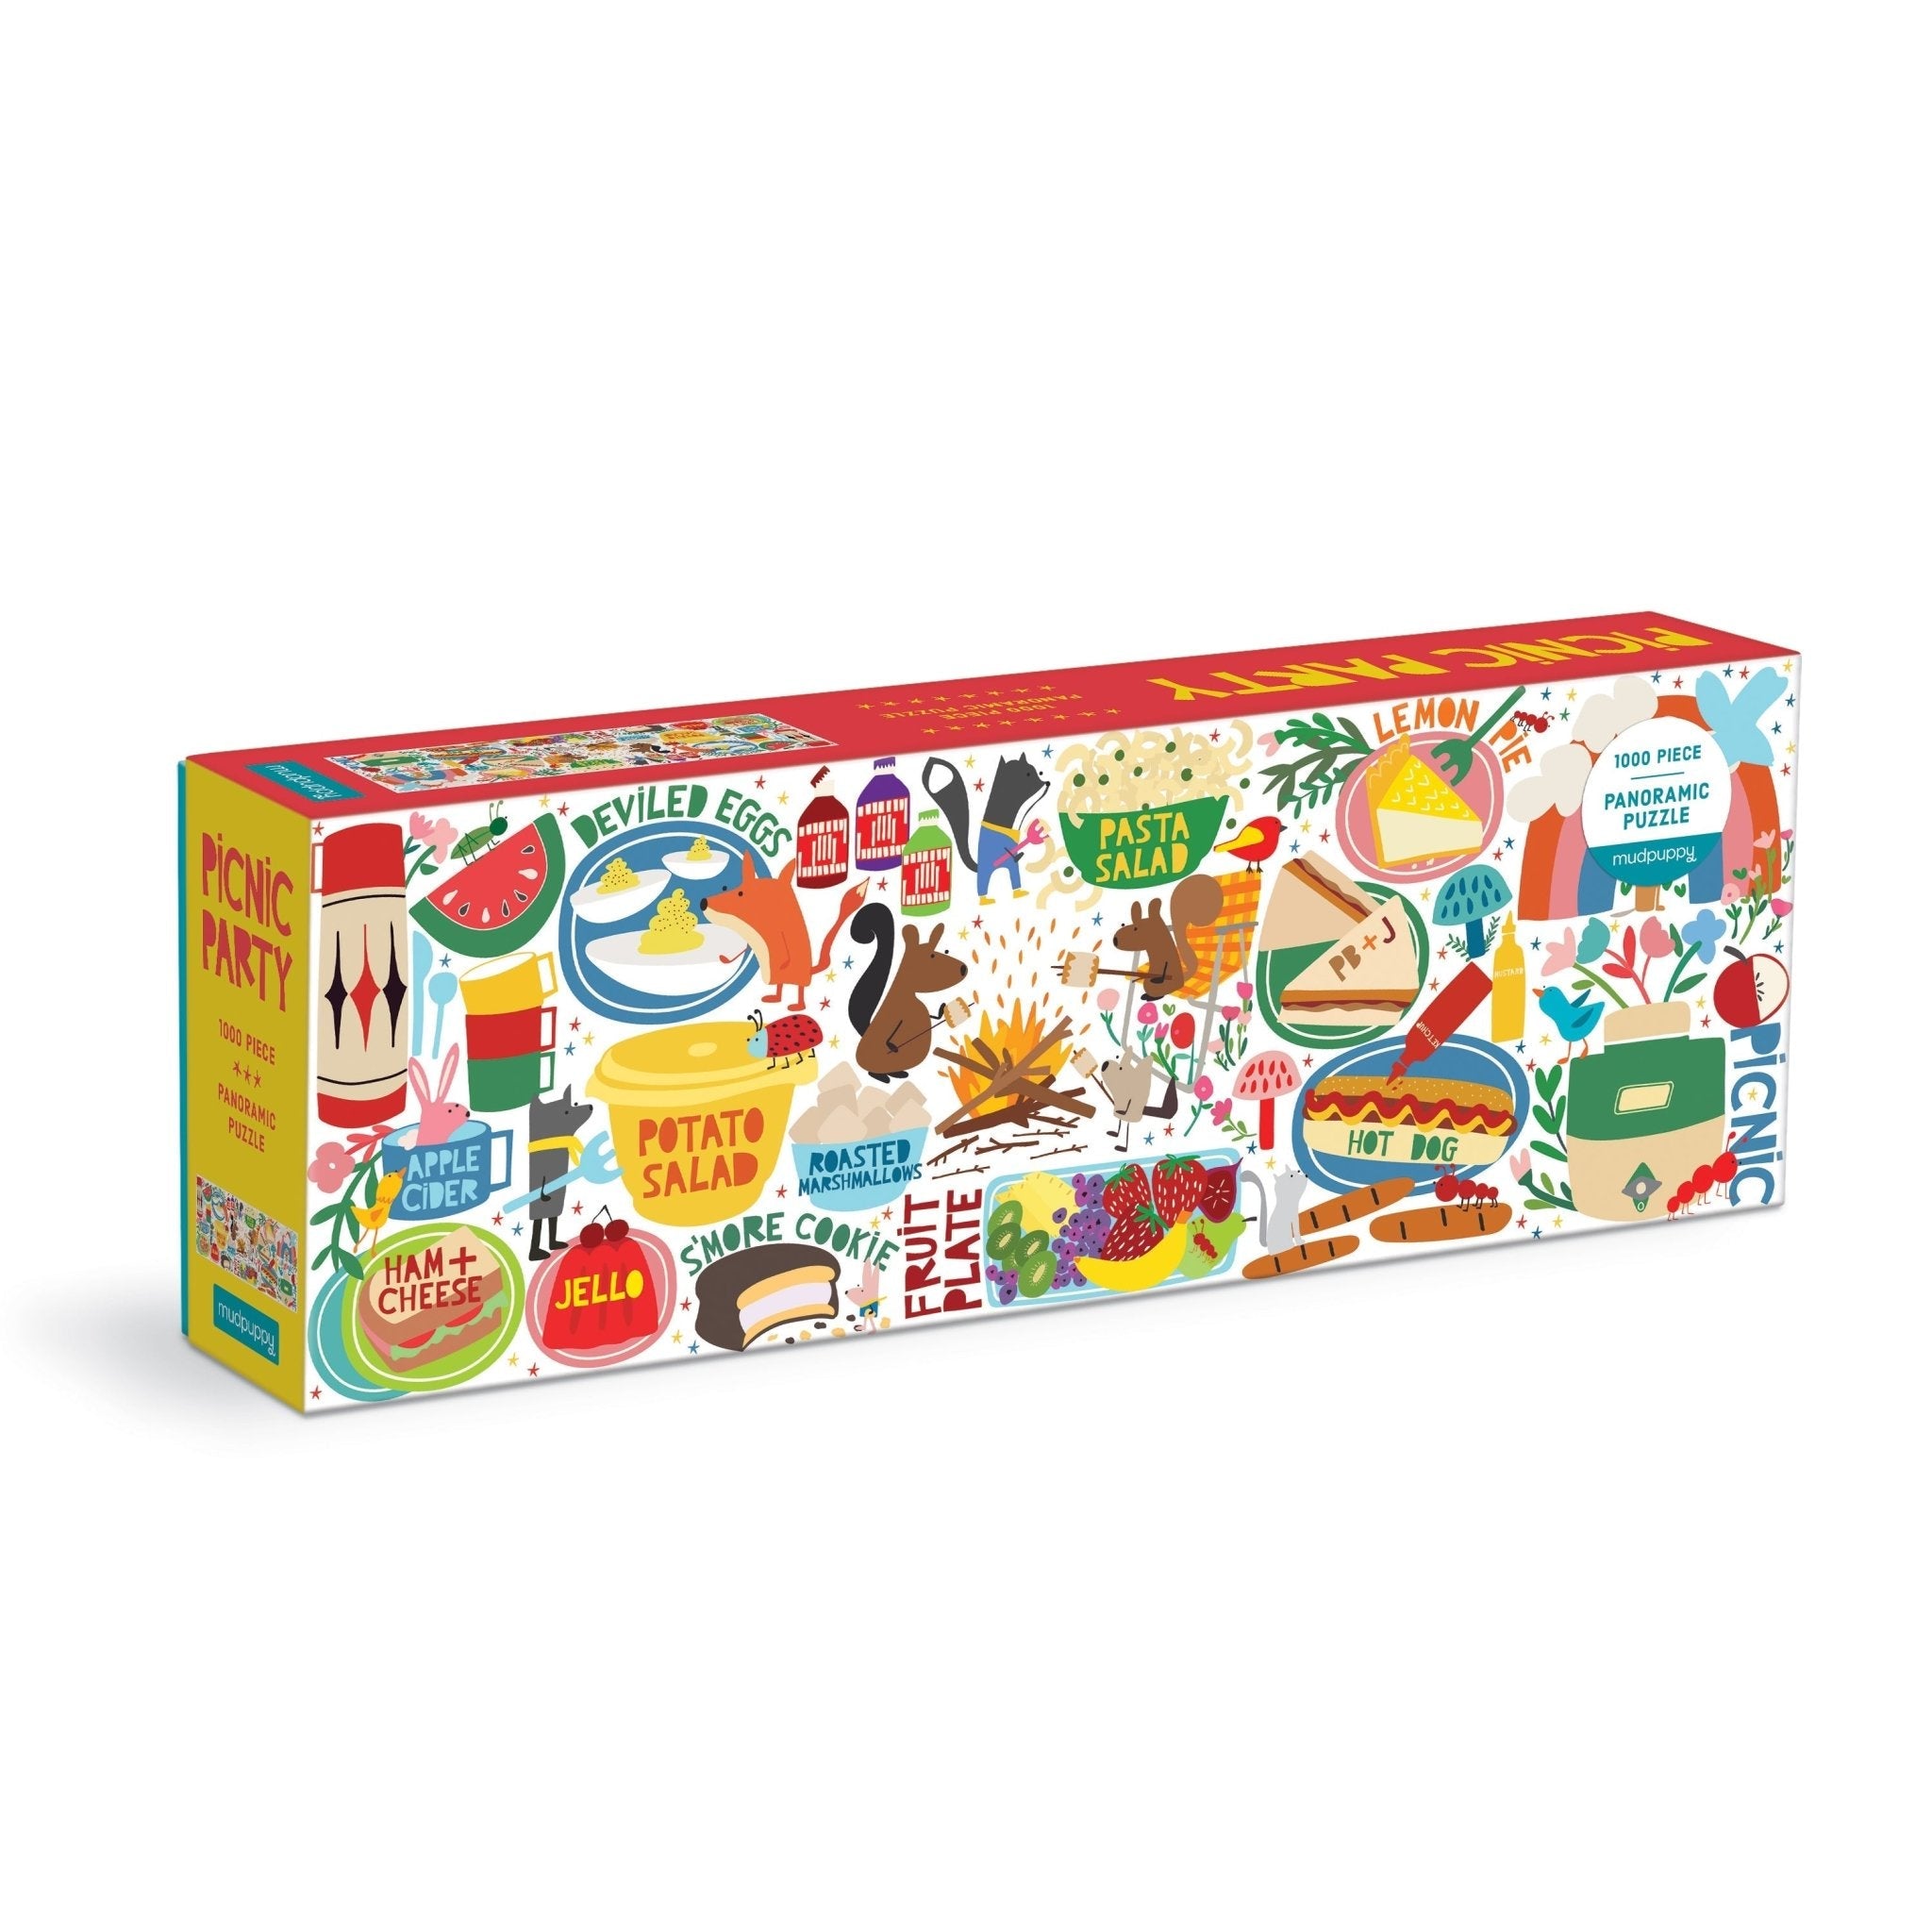 "Picnic Party" Panoramic Family Puzzle - 1000 Piece